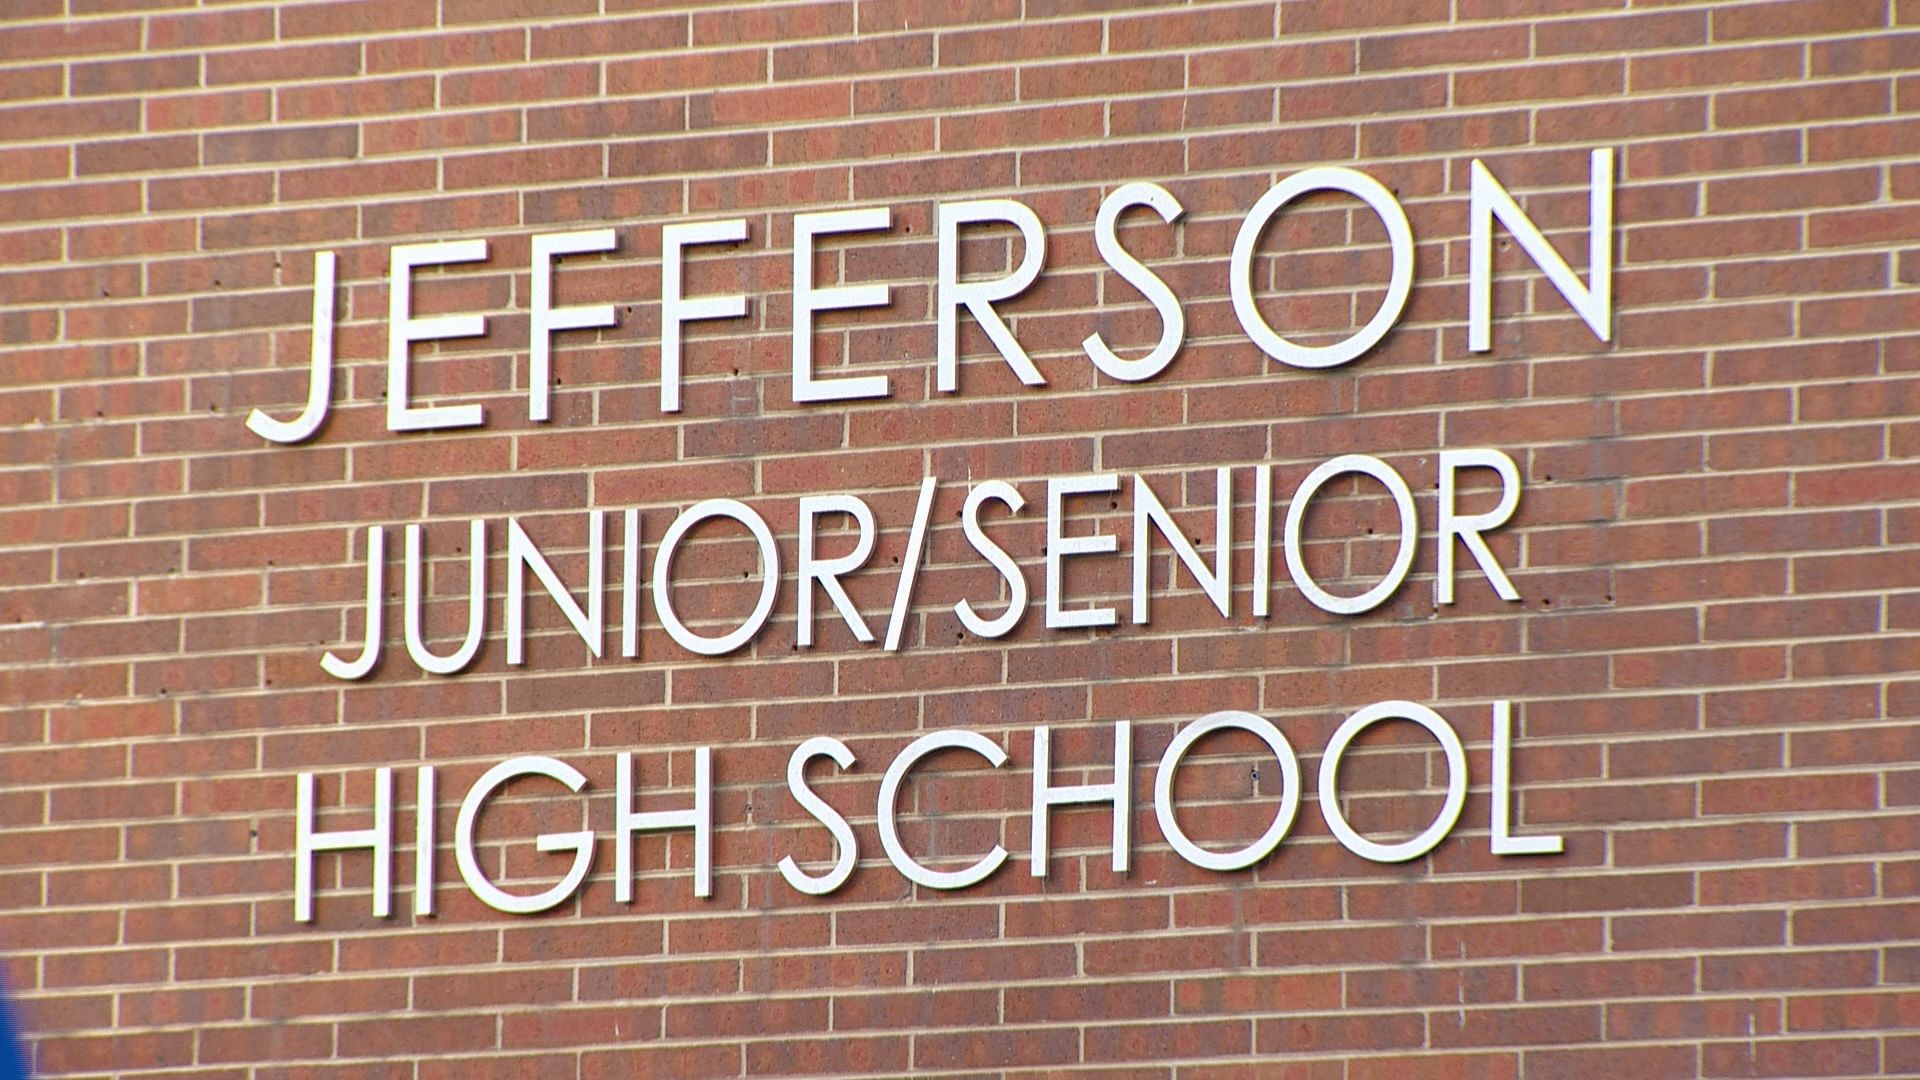 The Jefferson Project is a series that will chronicle four students and the principal of Jefferson High School in Edgewater. You can catch the first story on 9NEWS on Dec. 16 and 17.